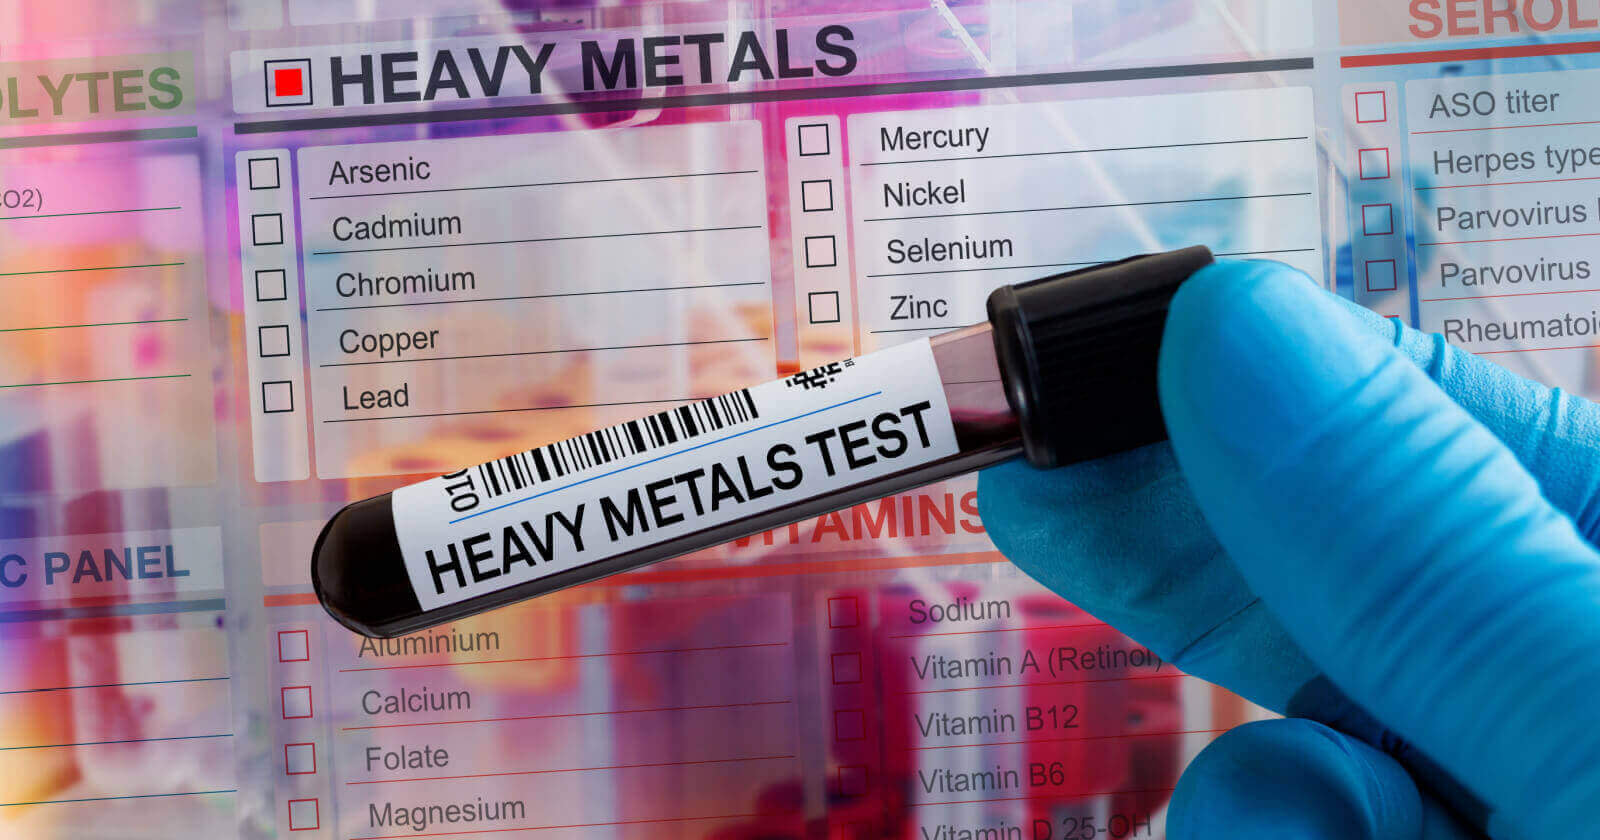 The impact of heavy metals